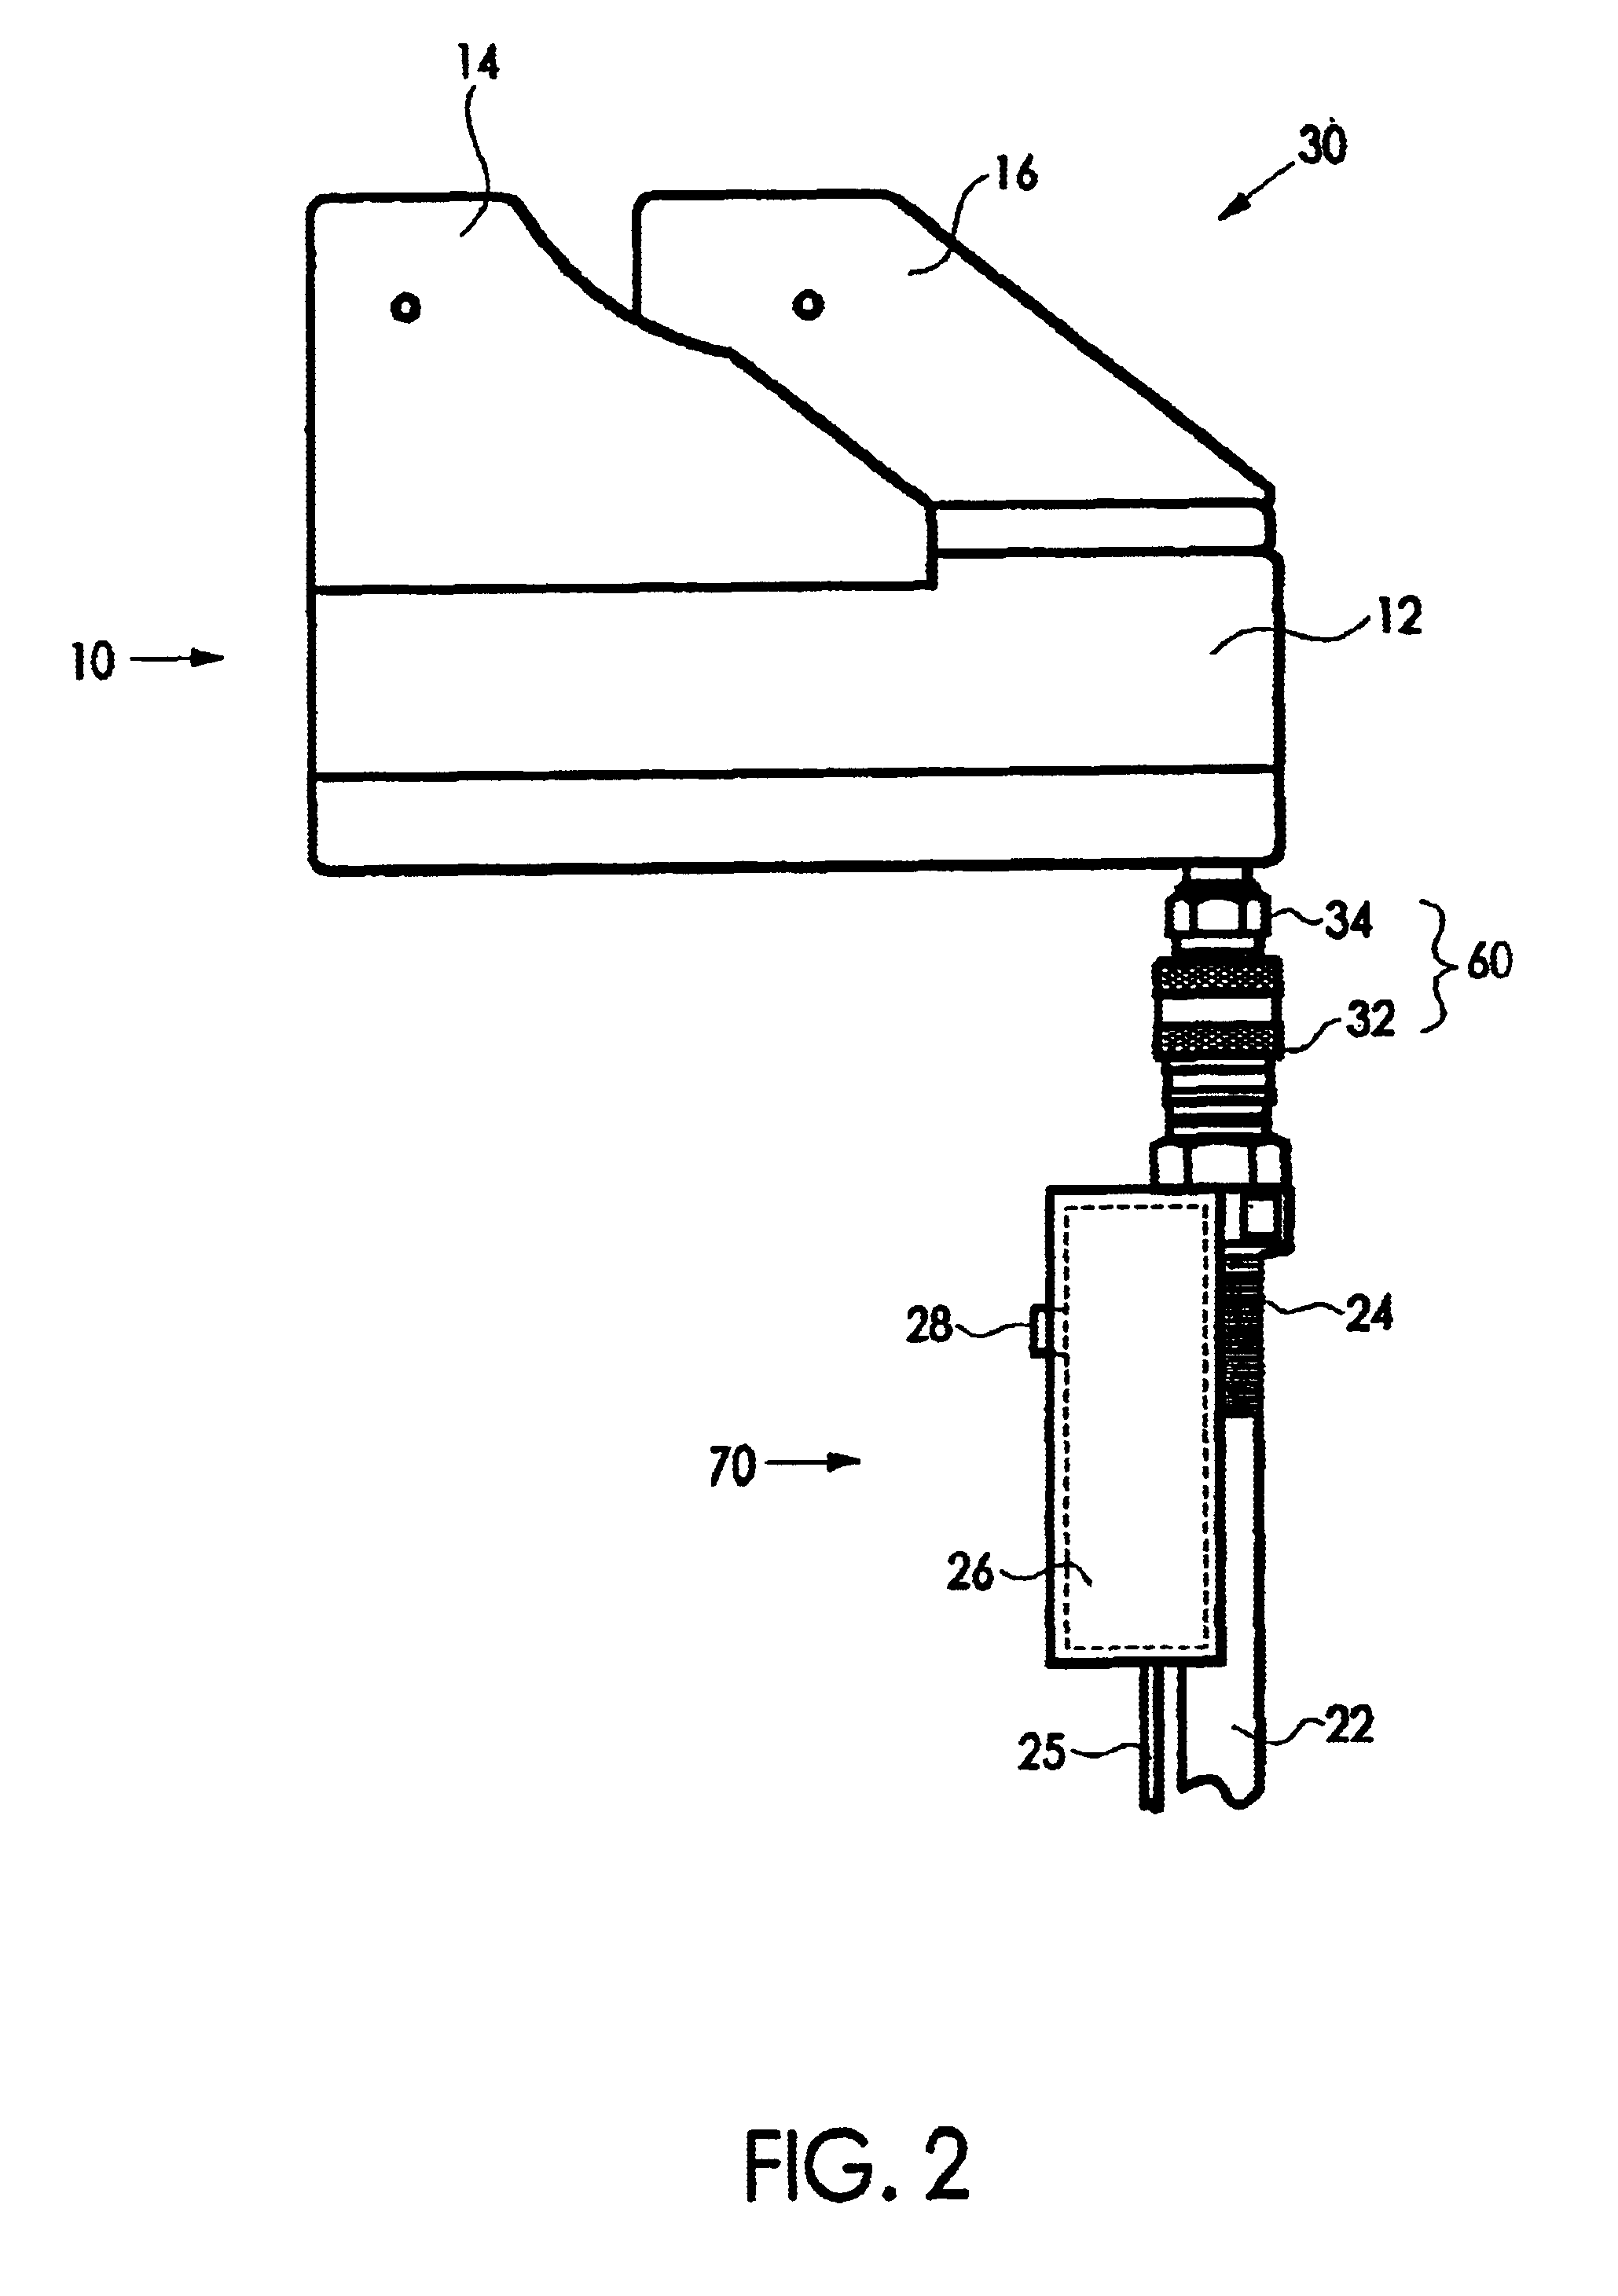 Remote actuation of installation tooling pump